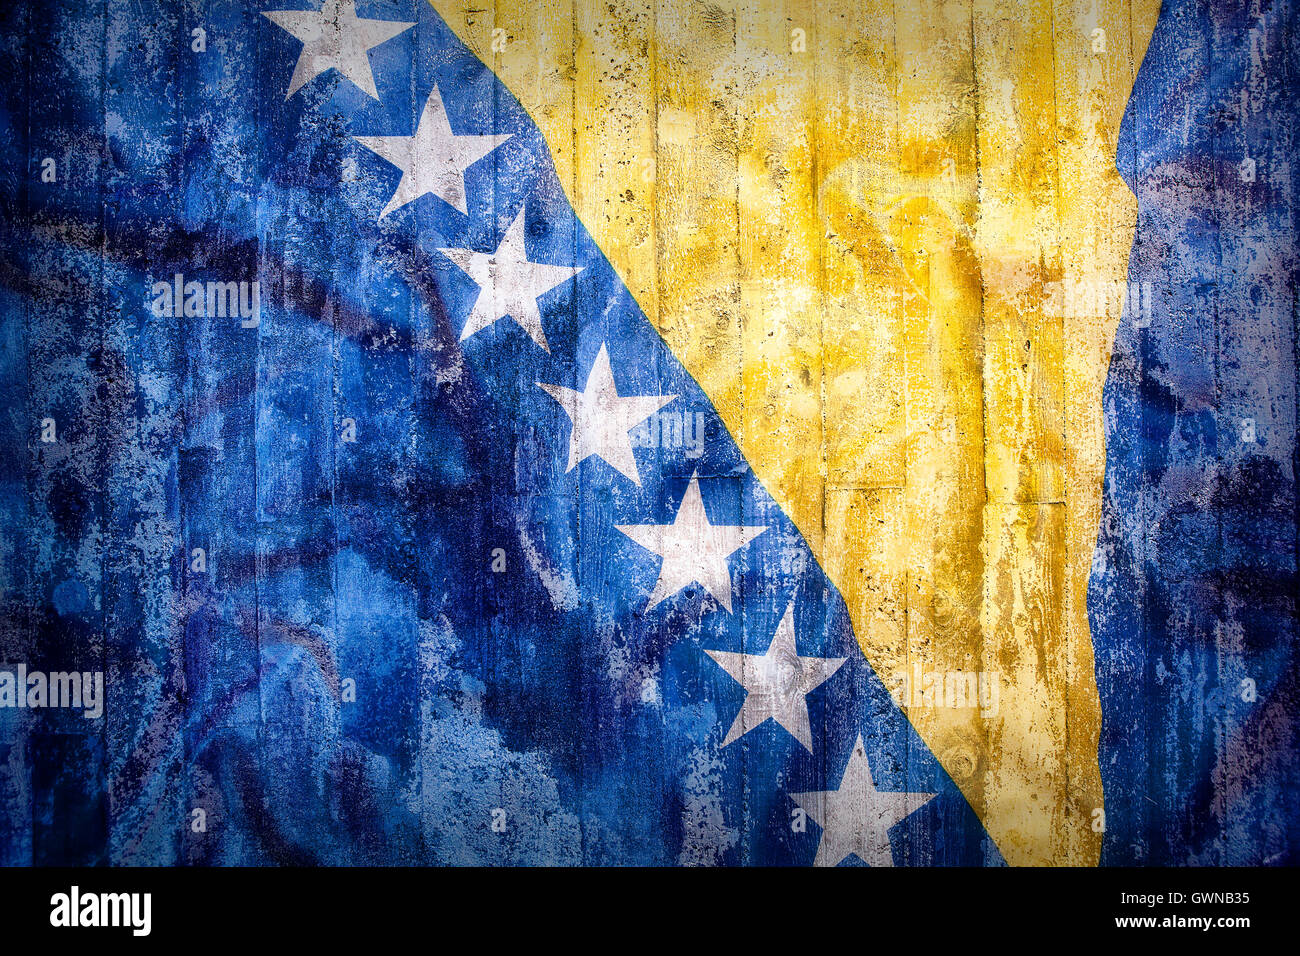 Grunge style of Bosnia and Herzegovina flag on a brick wall for background Stock Photo